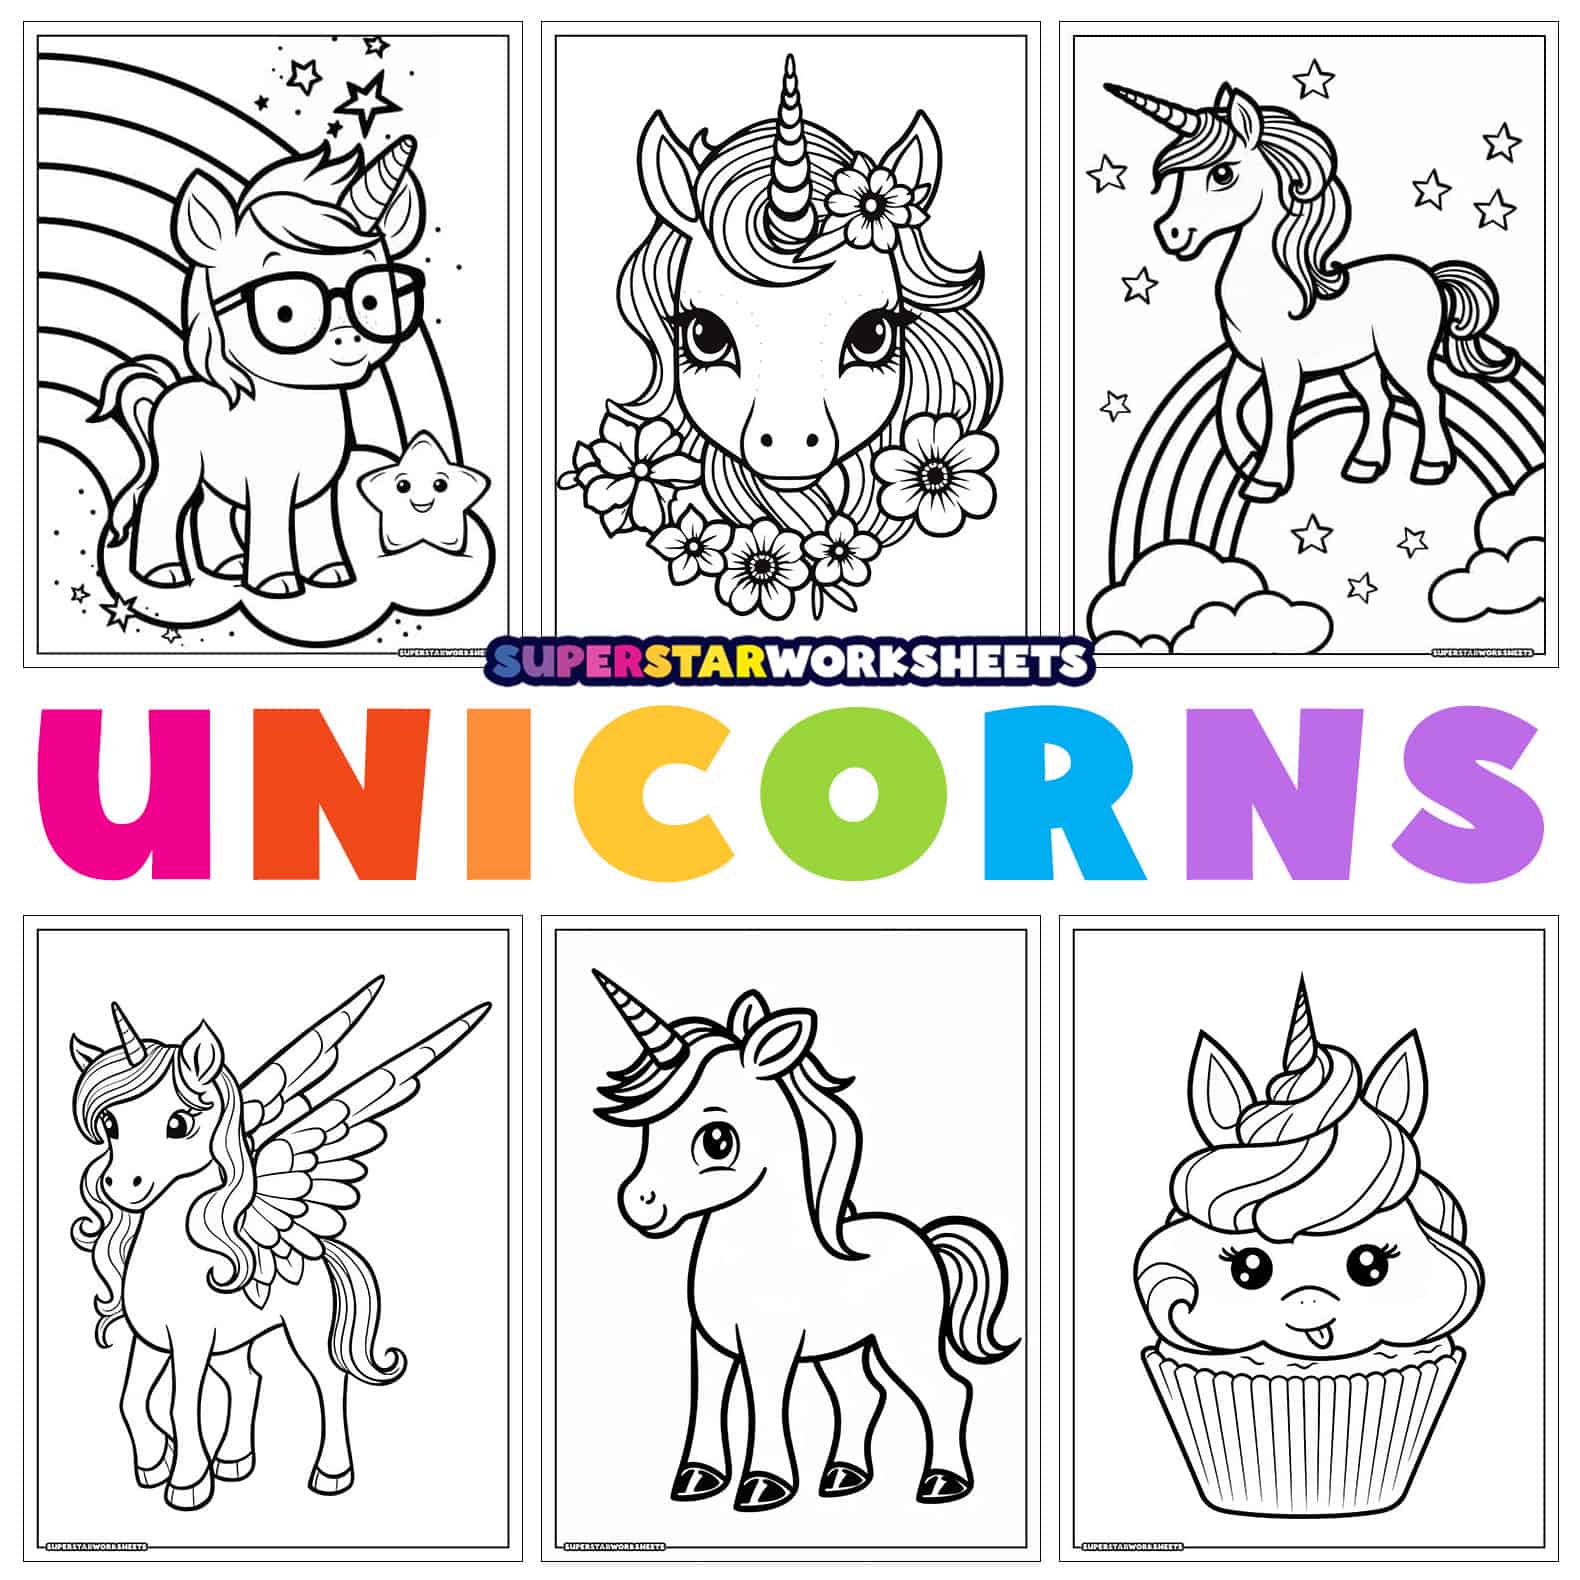 Animal Coloring Pages Lesson Plans & Worksheets Reviewed by Teachers